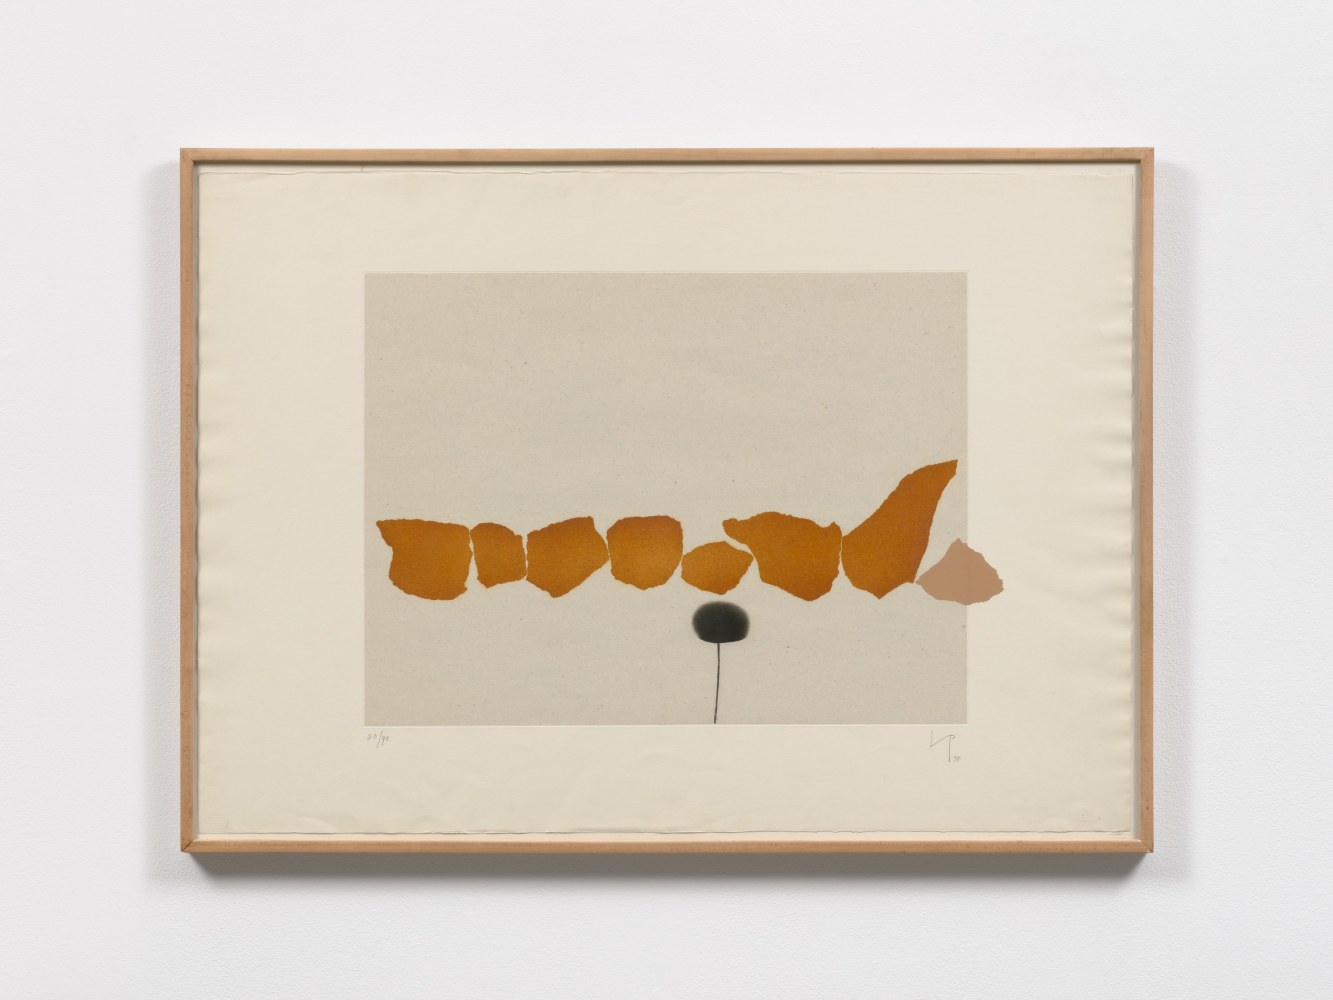 Autunno, 1978

color aquatint, edition of 90

19 1/4 x 25 5/8 in. (48.9 x 65.1 cm)

framed: 29 3/8 x 40 5/8 x 1 1/4 in.

Sold